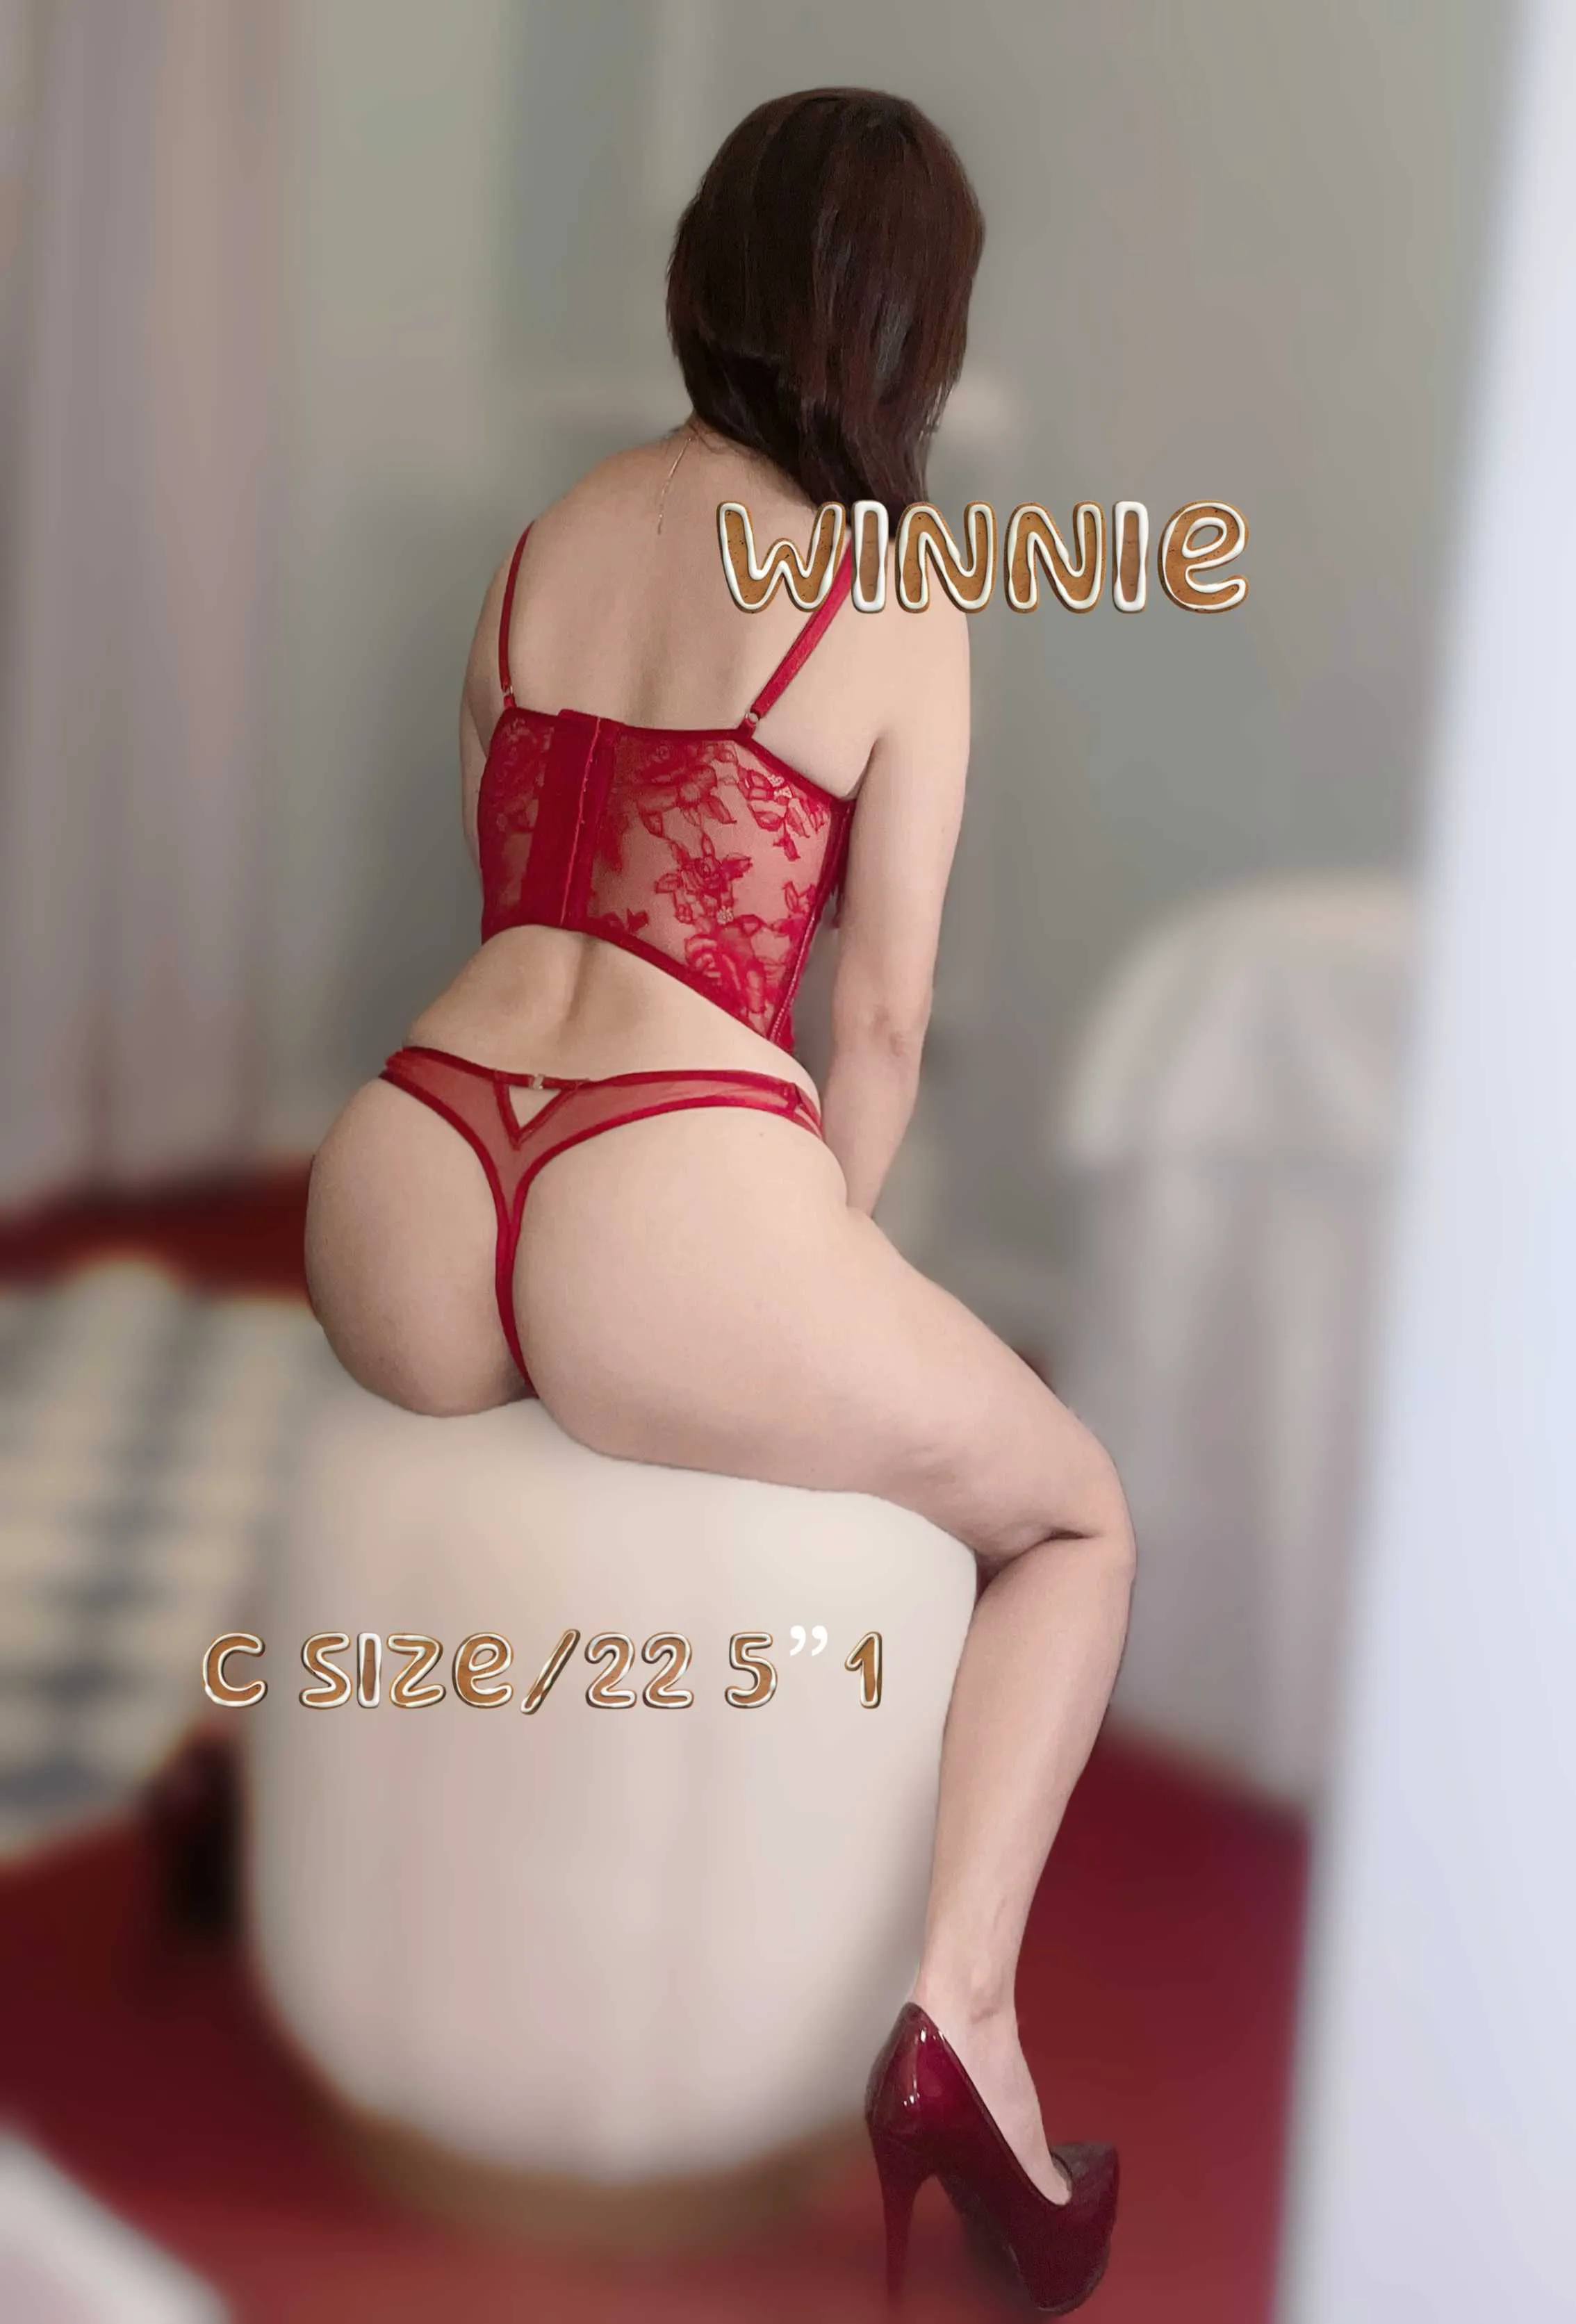 Reviews about escort with phone number 5177277277